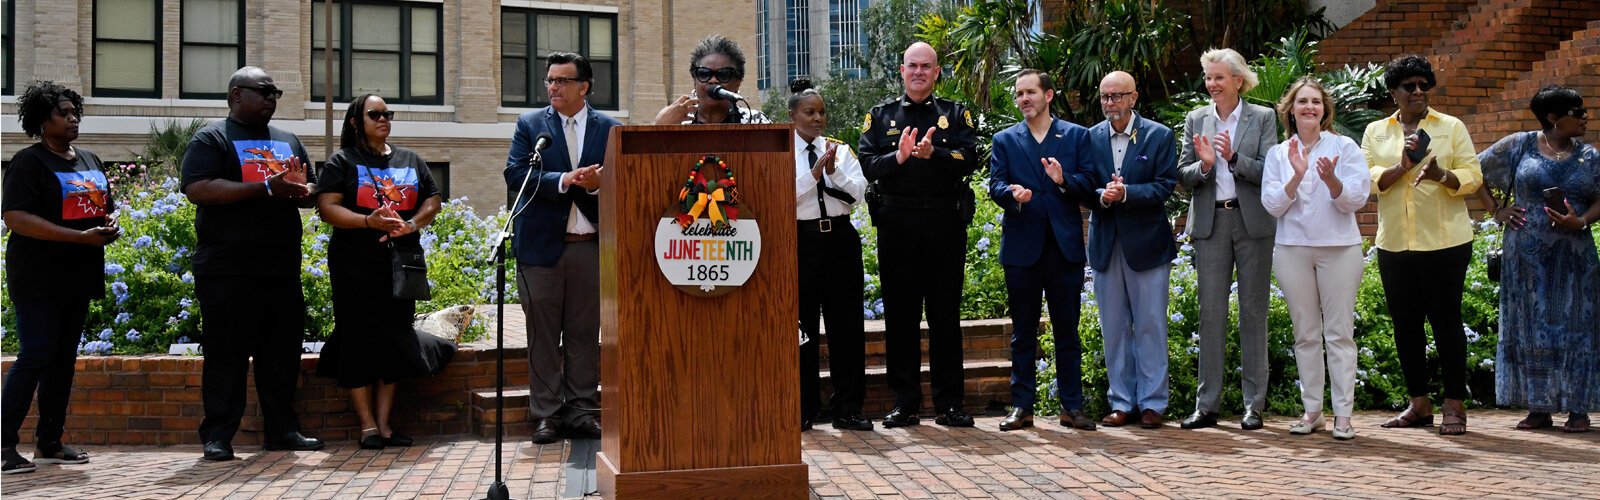 Applauded by members of the Tampa Bay Juneteenth Coalition and elected officials, Tampa City Councilwoman Gwen Henderson speaks about Juneteenth, encouraging all to find the joy in the pain that was suffered.